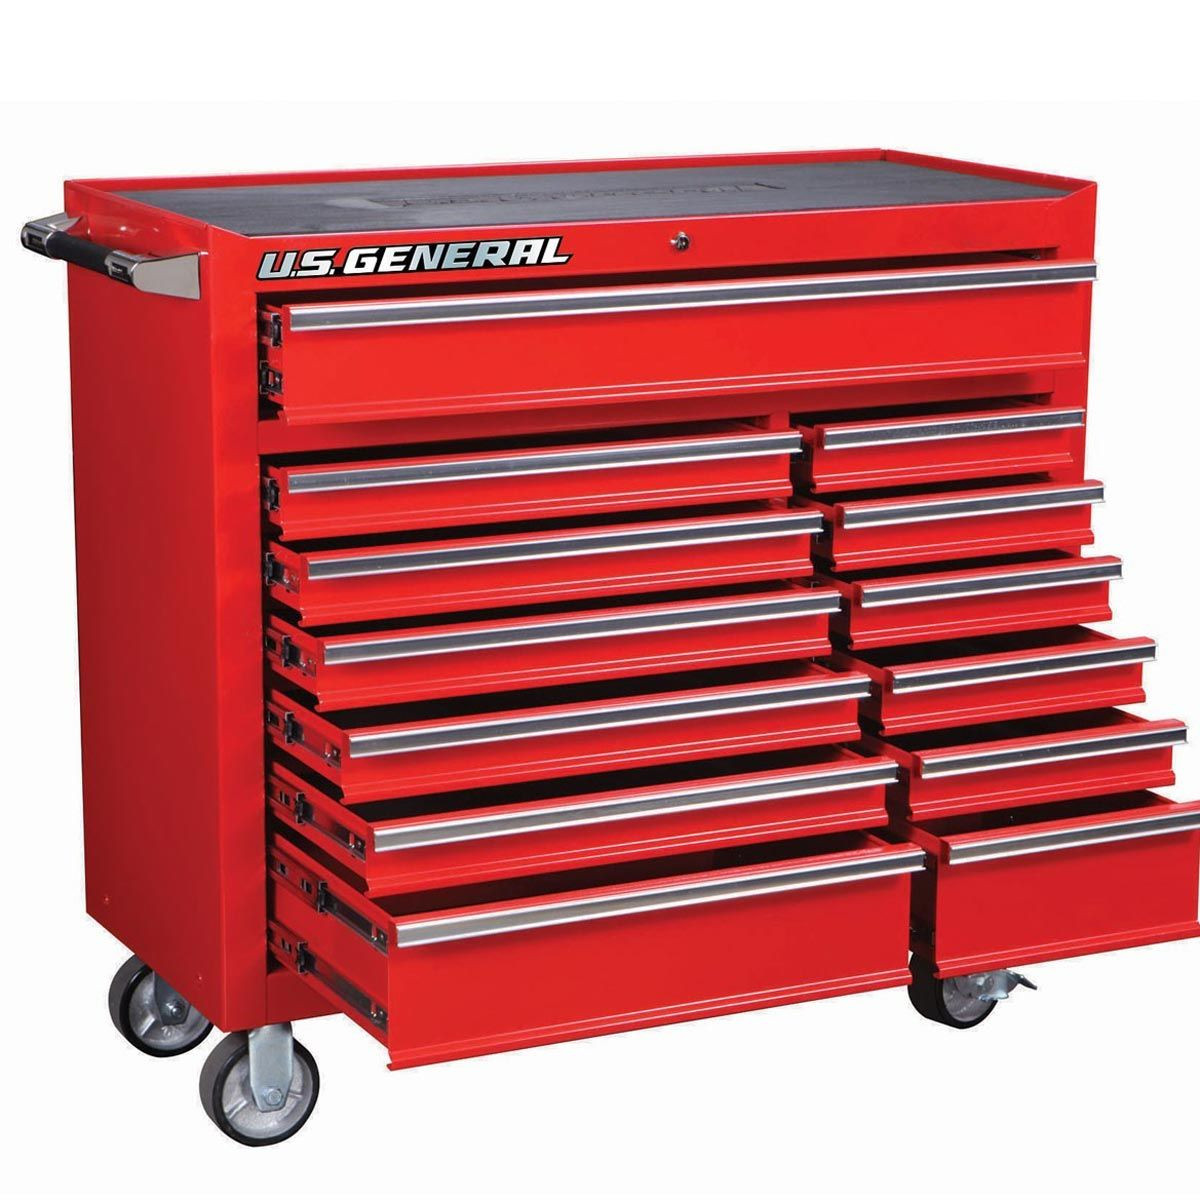 Harbor Freight Garage Organizer
 20 Amazing Storage Products from Harbor Freight